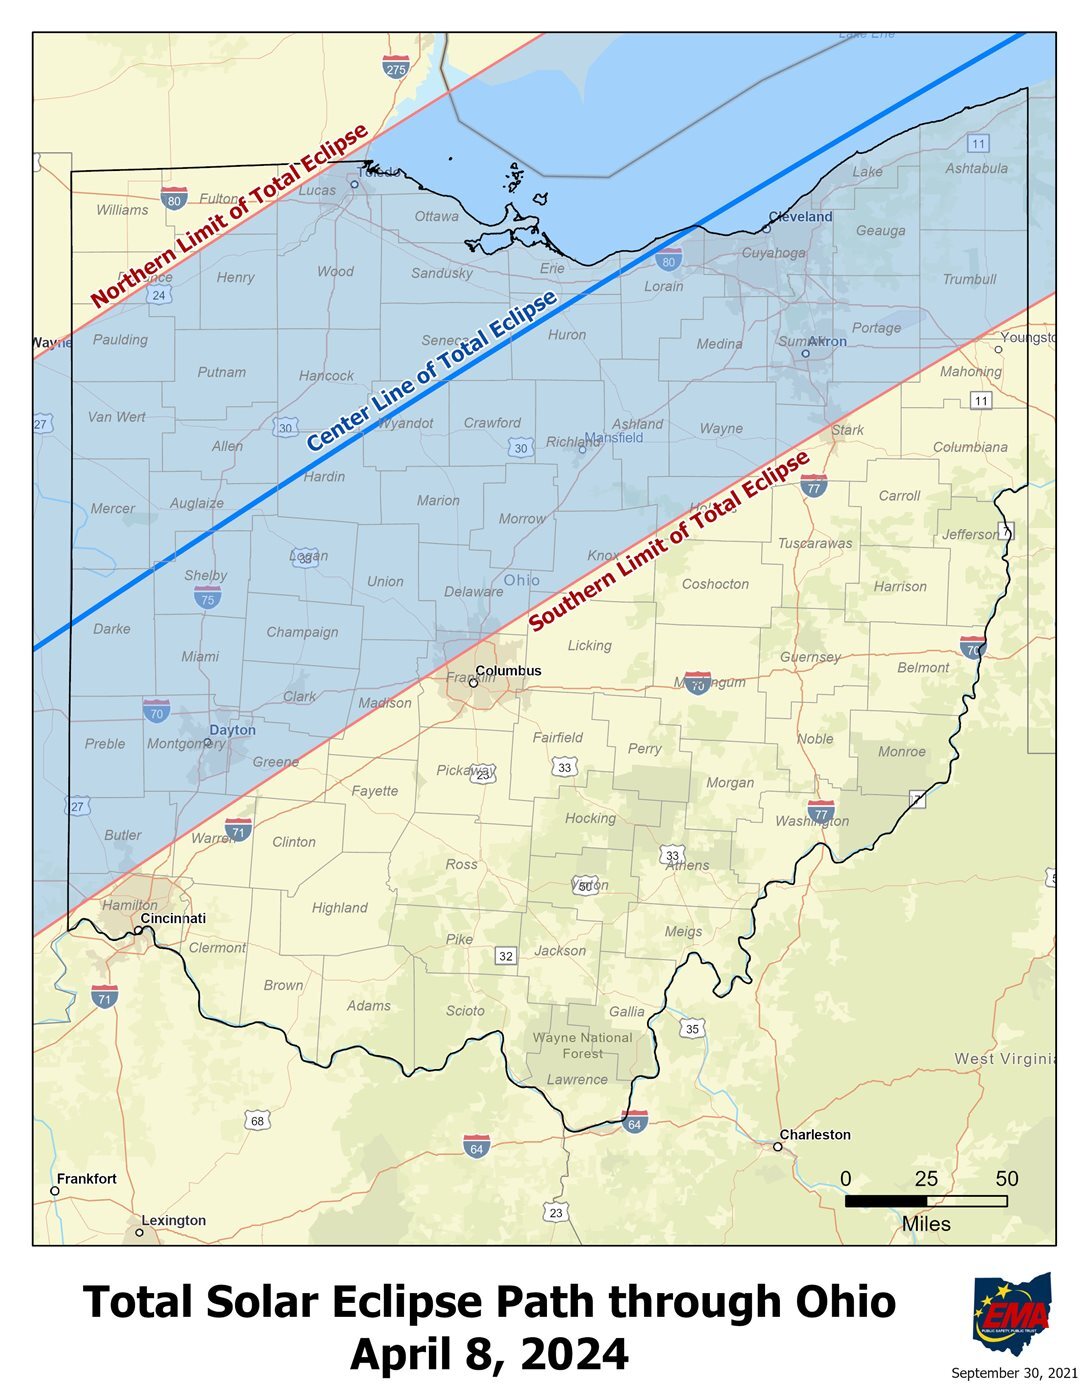 Map shows the path of the total solar eclipse through Ohio on 4/8/24